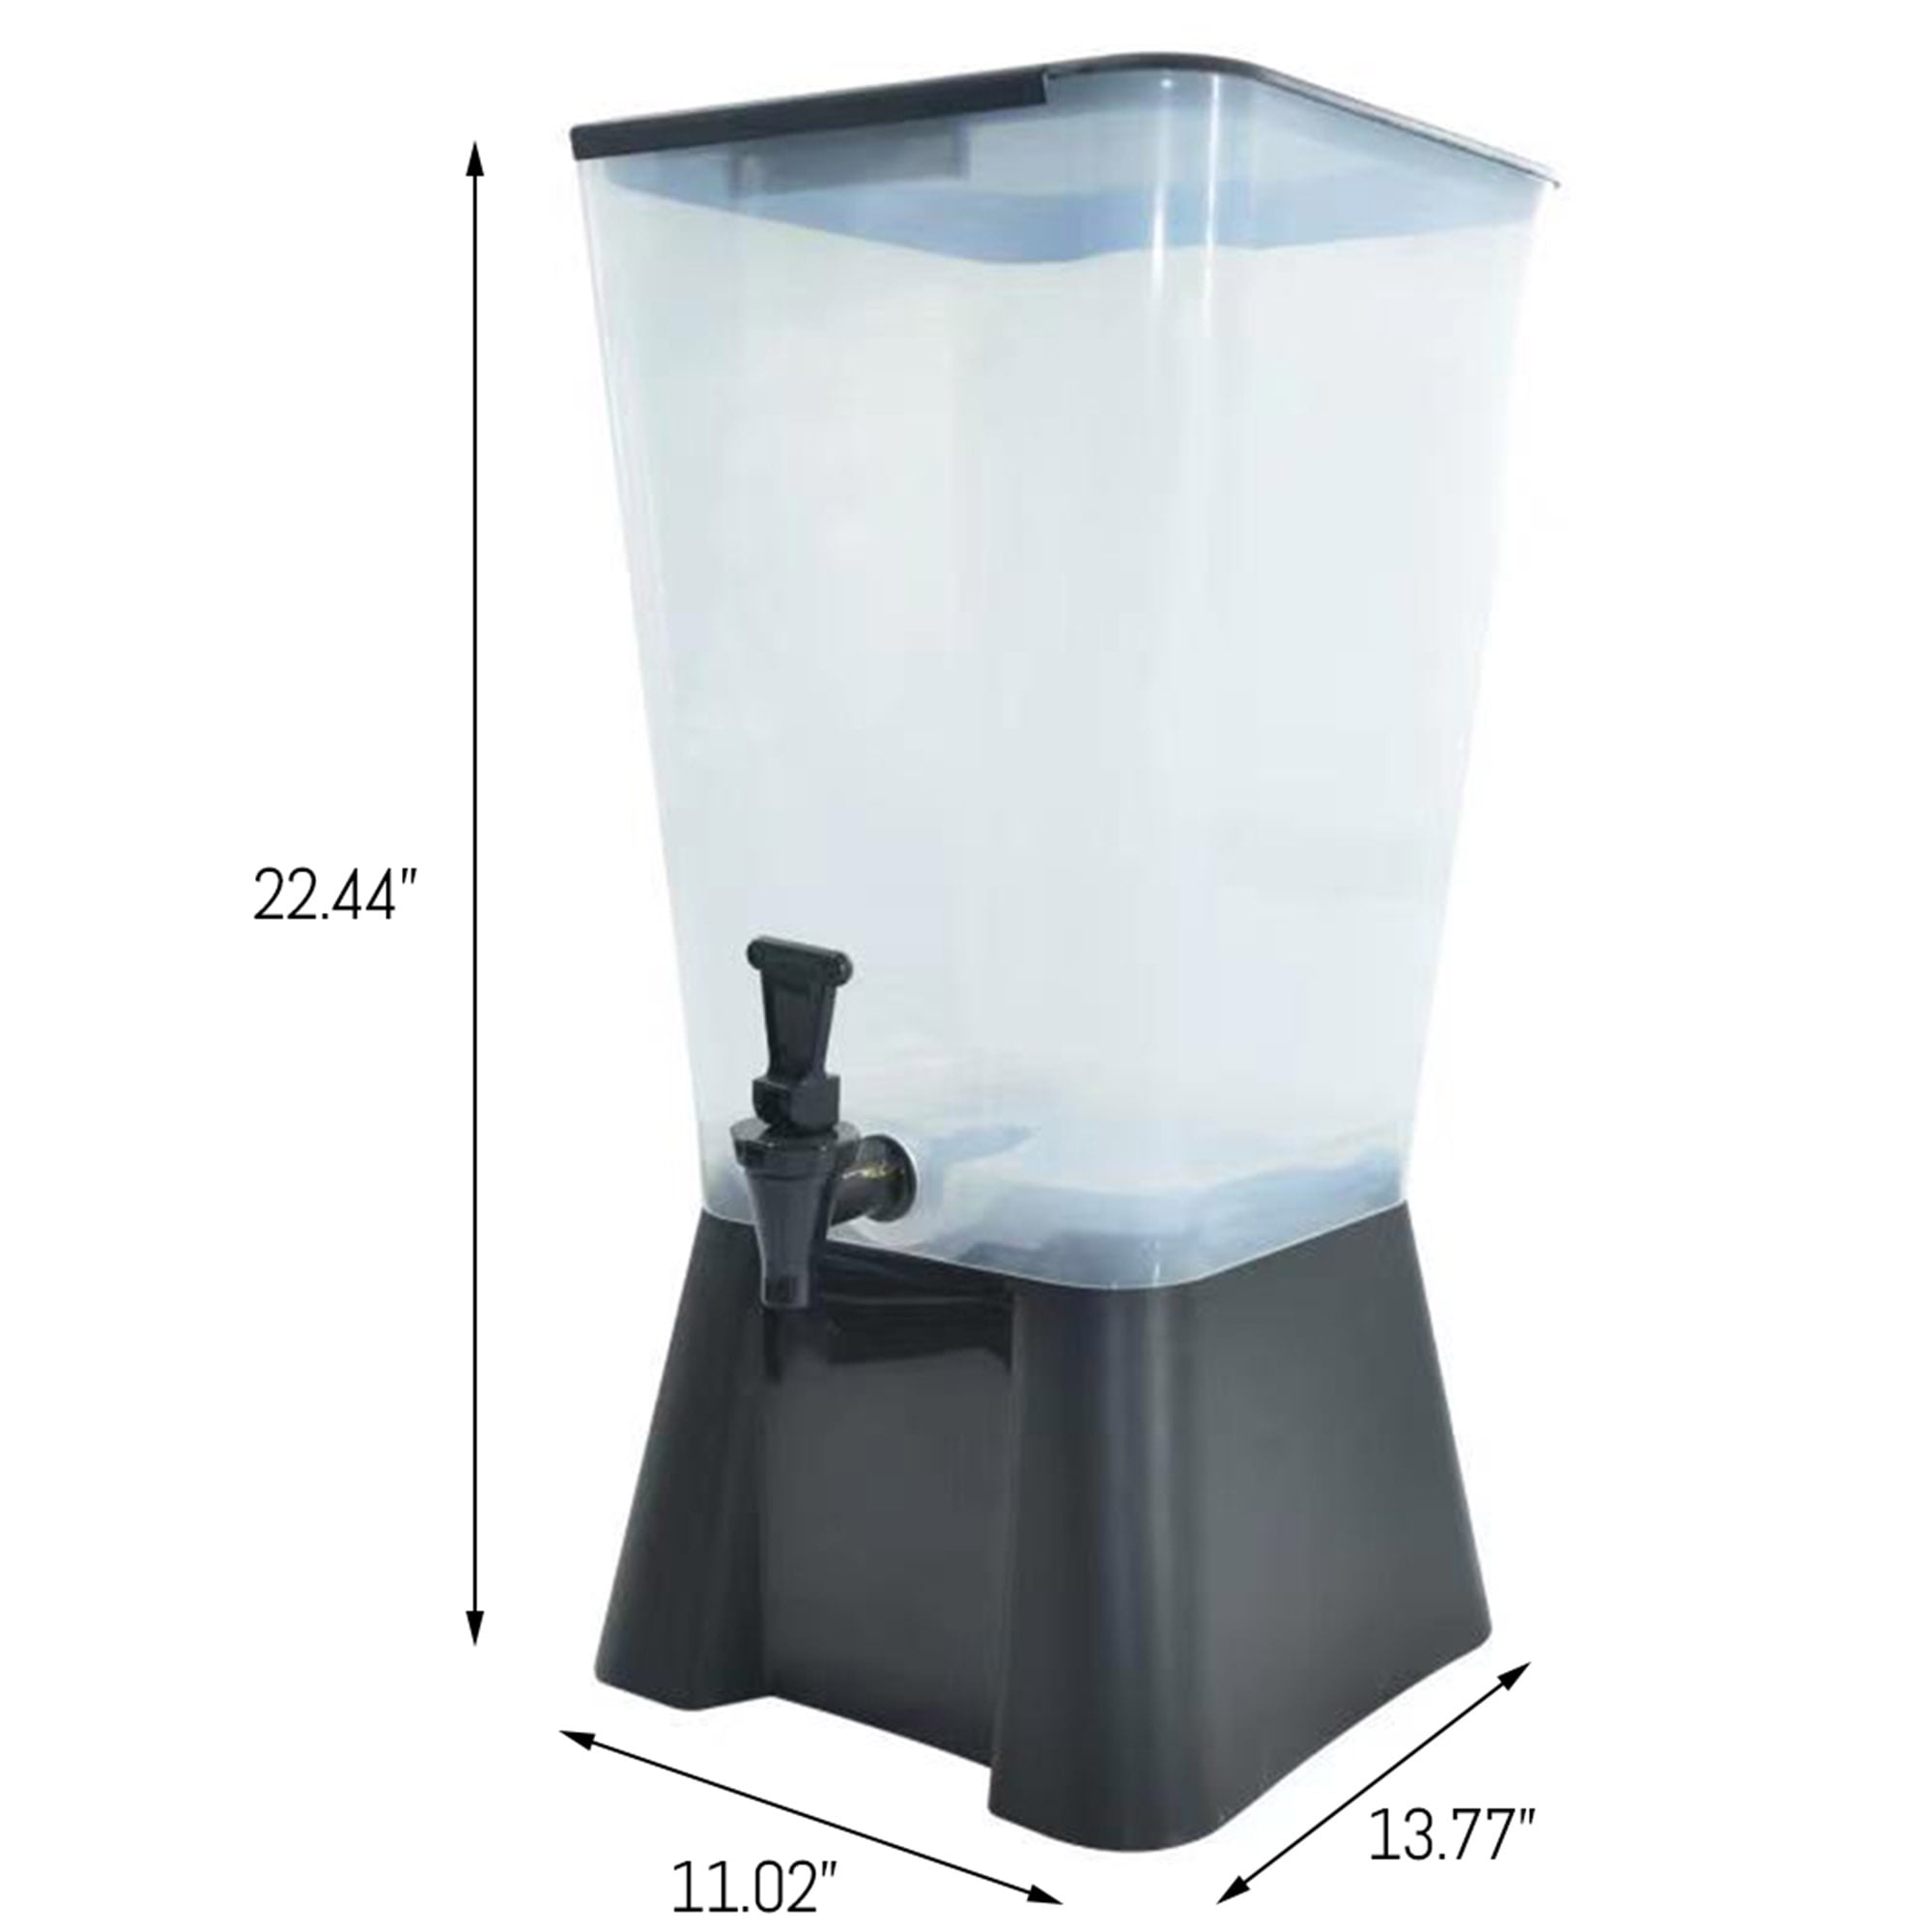 Cater Strong BD6 6 gal. Round White Plastic Beverage Dispenser